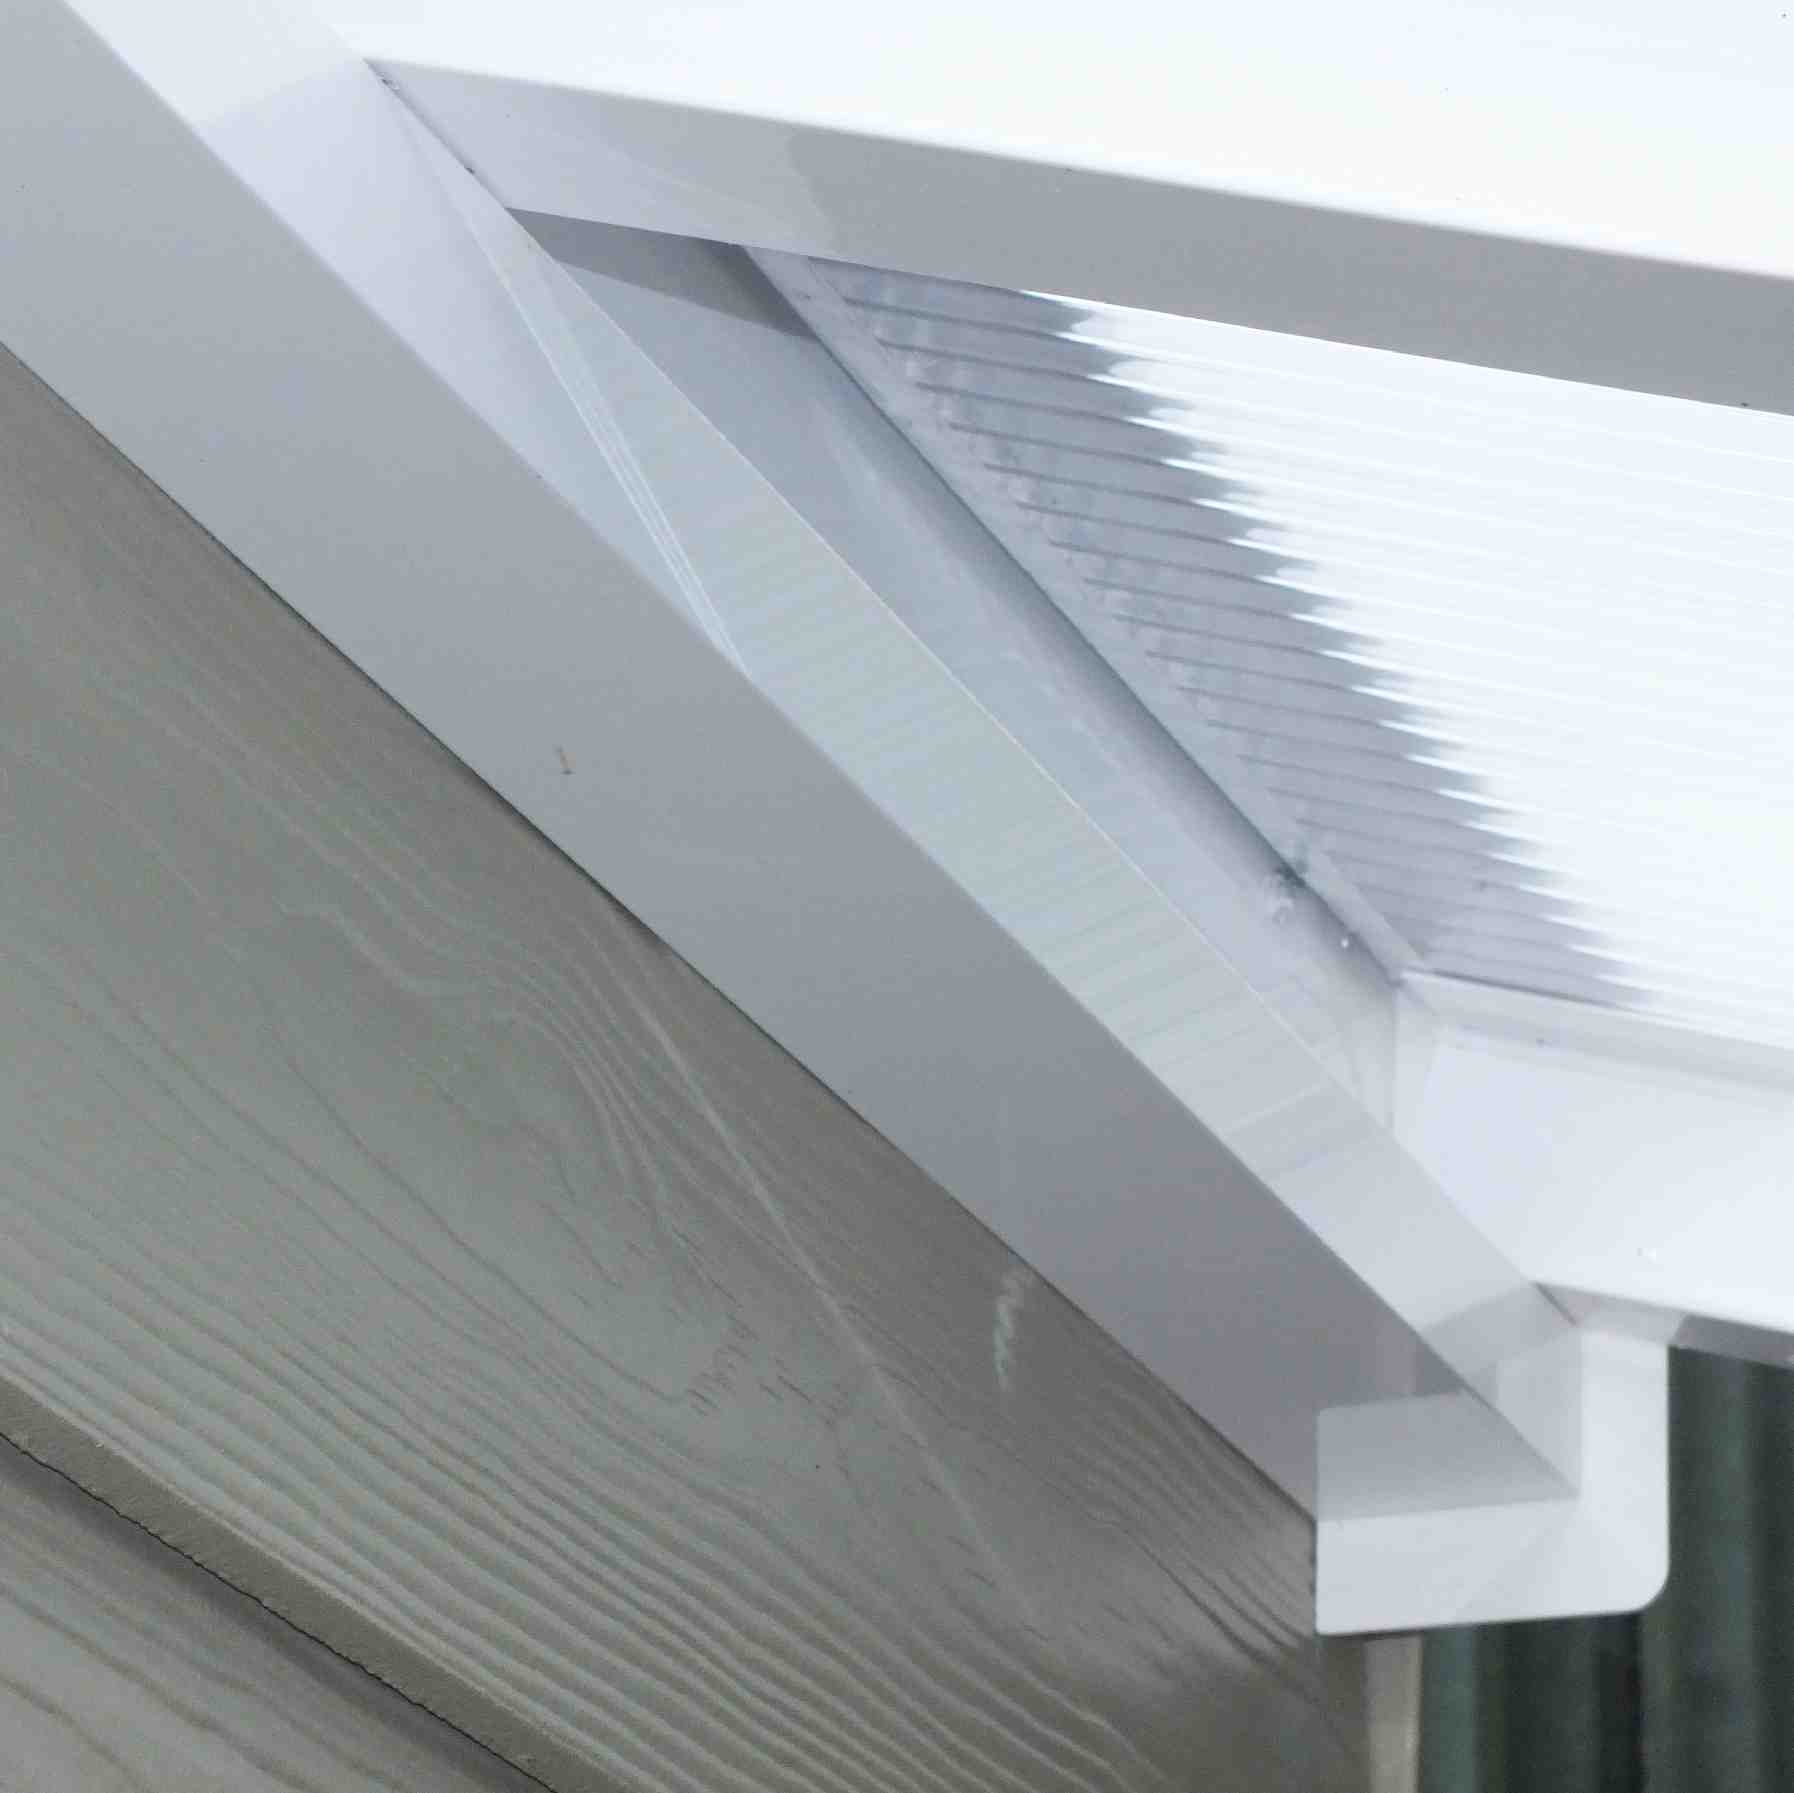 Great deals on Omega Verandah White with 16mm Polycarbonate Glazing - 6.0m (W) x 1.5m (P), (3) Supporting Posts